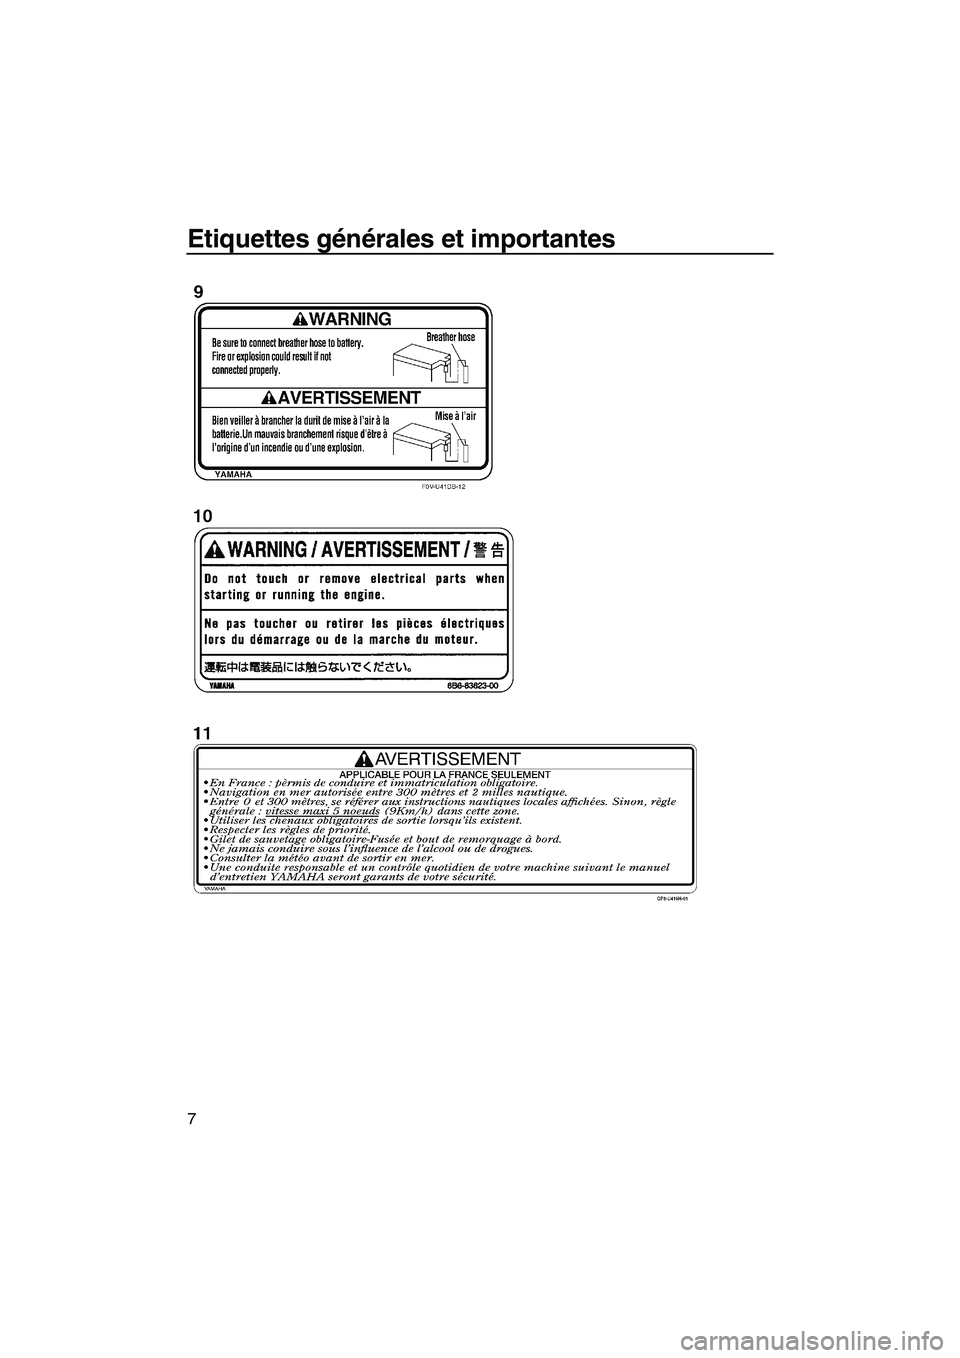 YAMAHA FX HO CRUISER 2009  Notices Demploi (in French) Etiquettes générales et importantes
7
UF2H70F0.book  Page 7  Friday, January 16, 2009  9:38 AM 